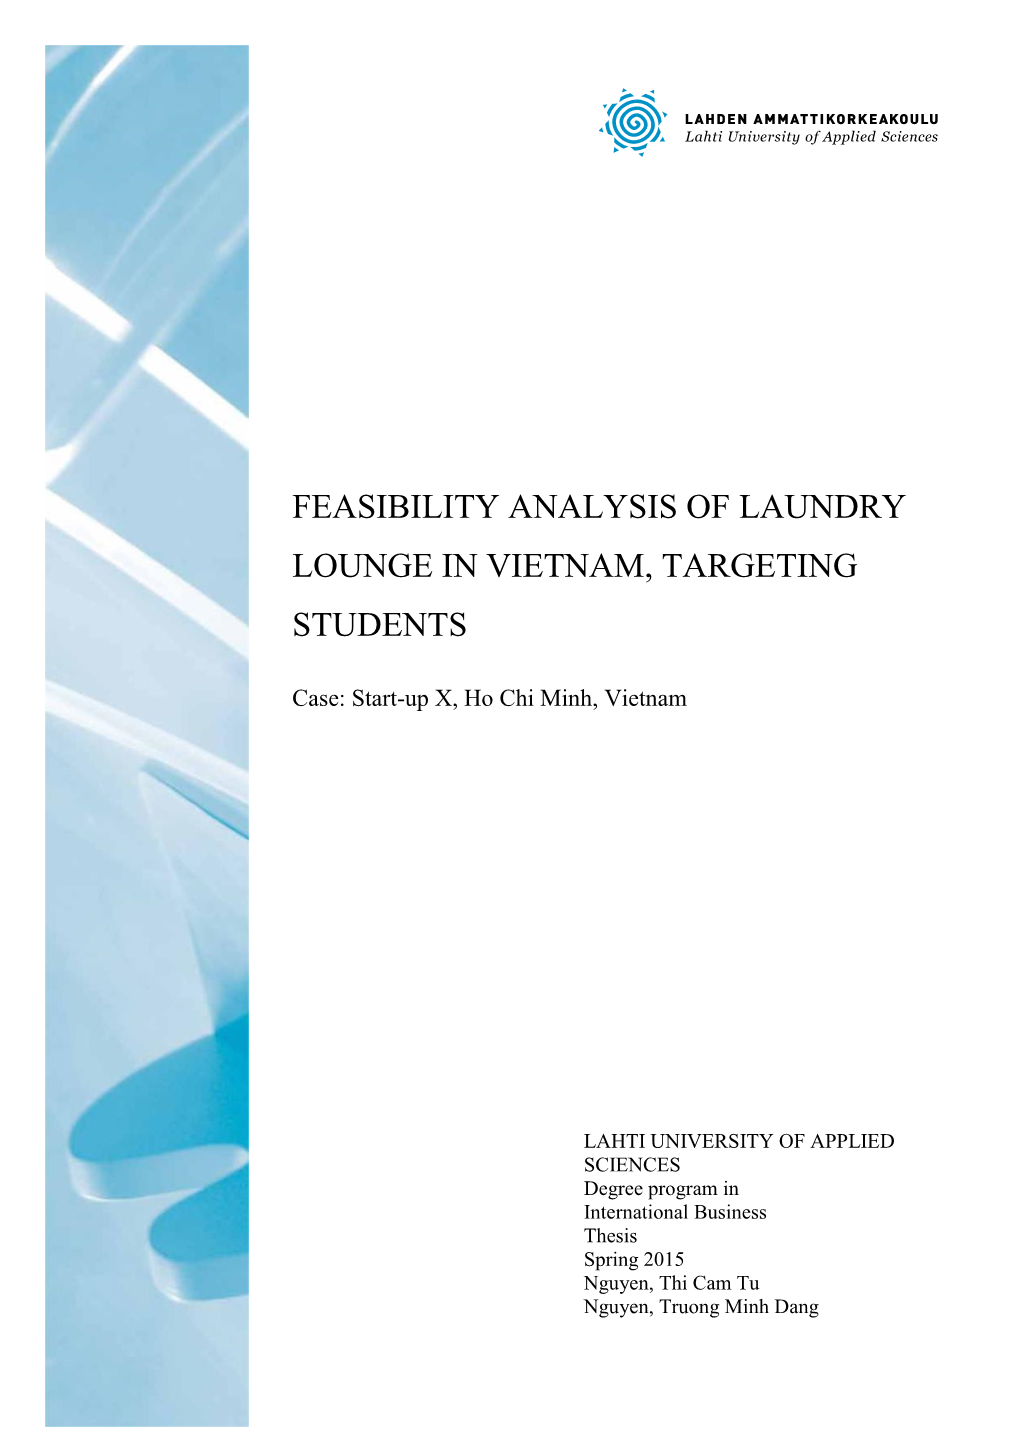 Feasibility Analysis of Laundry Lounge in Vietnam, Targeting Students